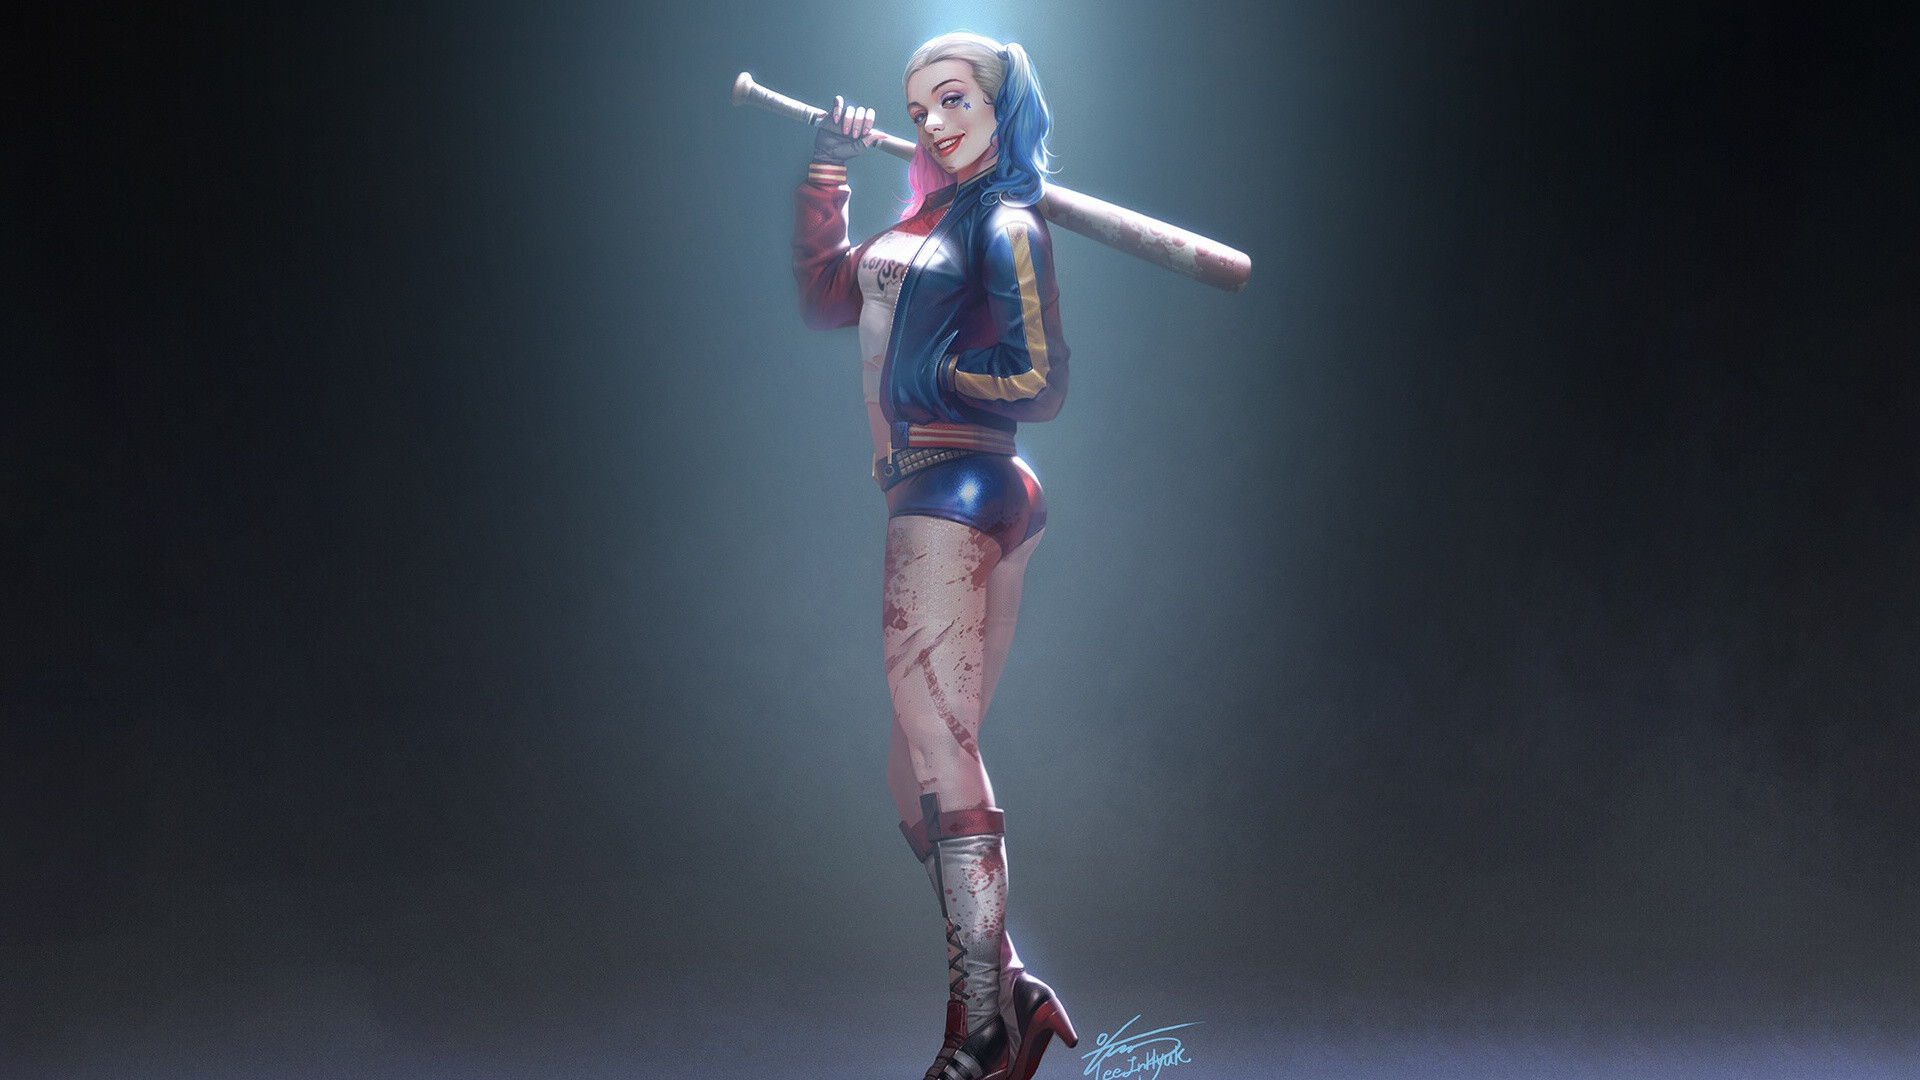 DC Villain: Harley Quinn's abilities include expert gymnastic skills, proficiency in weapons and hand-to-hand combat. 1920x1080 Full HD Background.